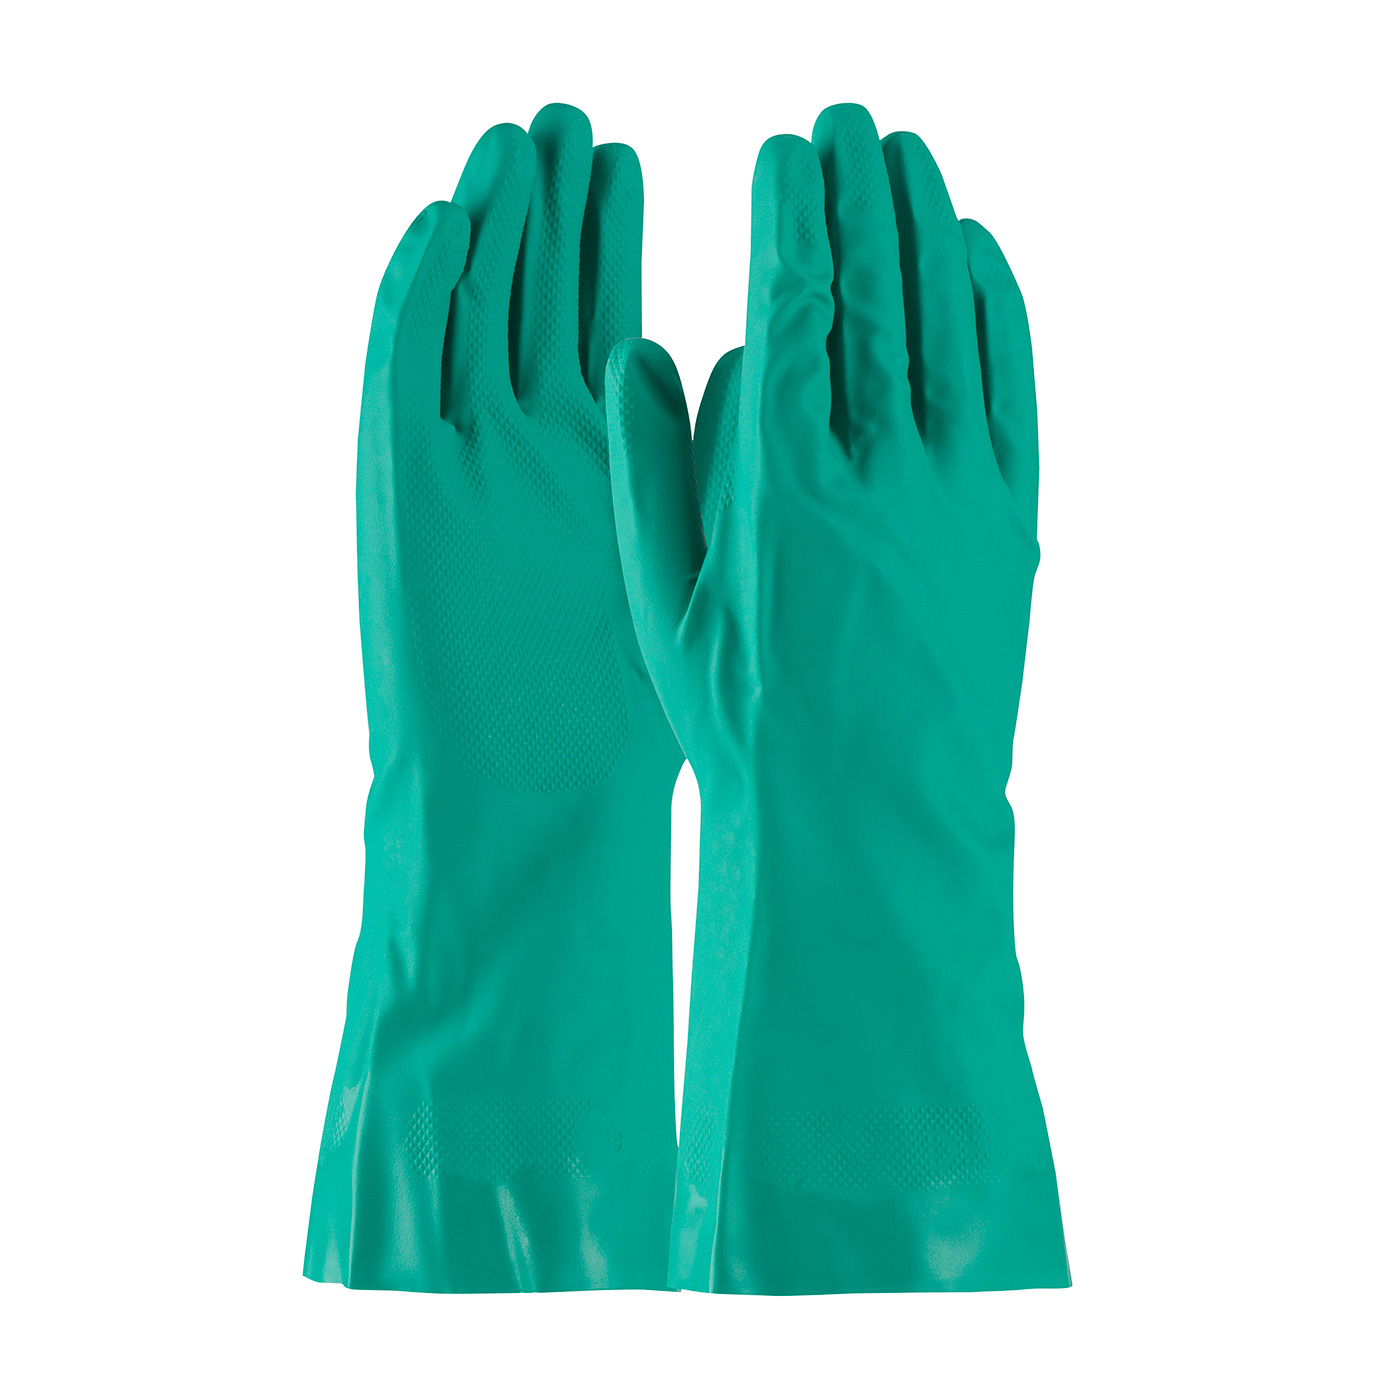 PIP 50-N160G/XL Assurance Unsupported Nitrile, Flock Lined with Raised Diamond Grip - 15 Mi - X-Large PID-50 N160G XL